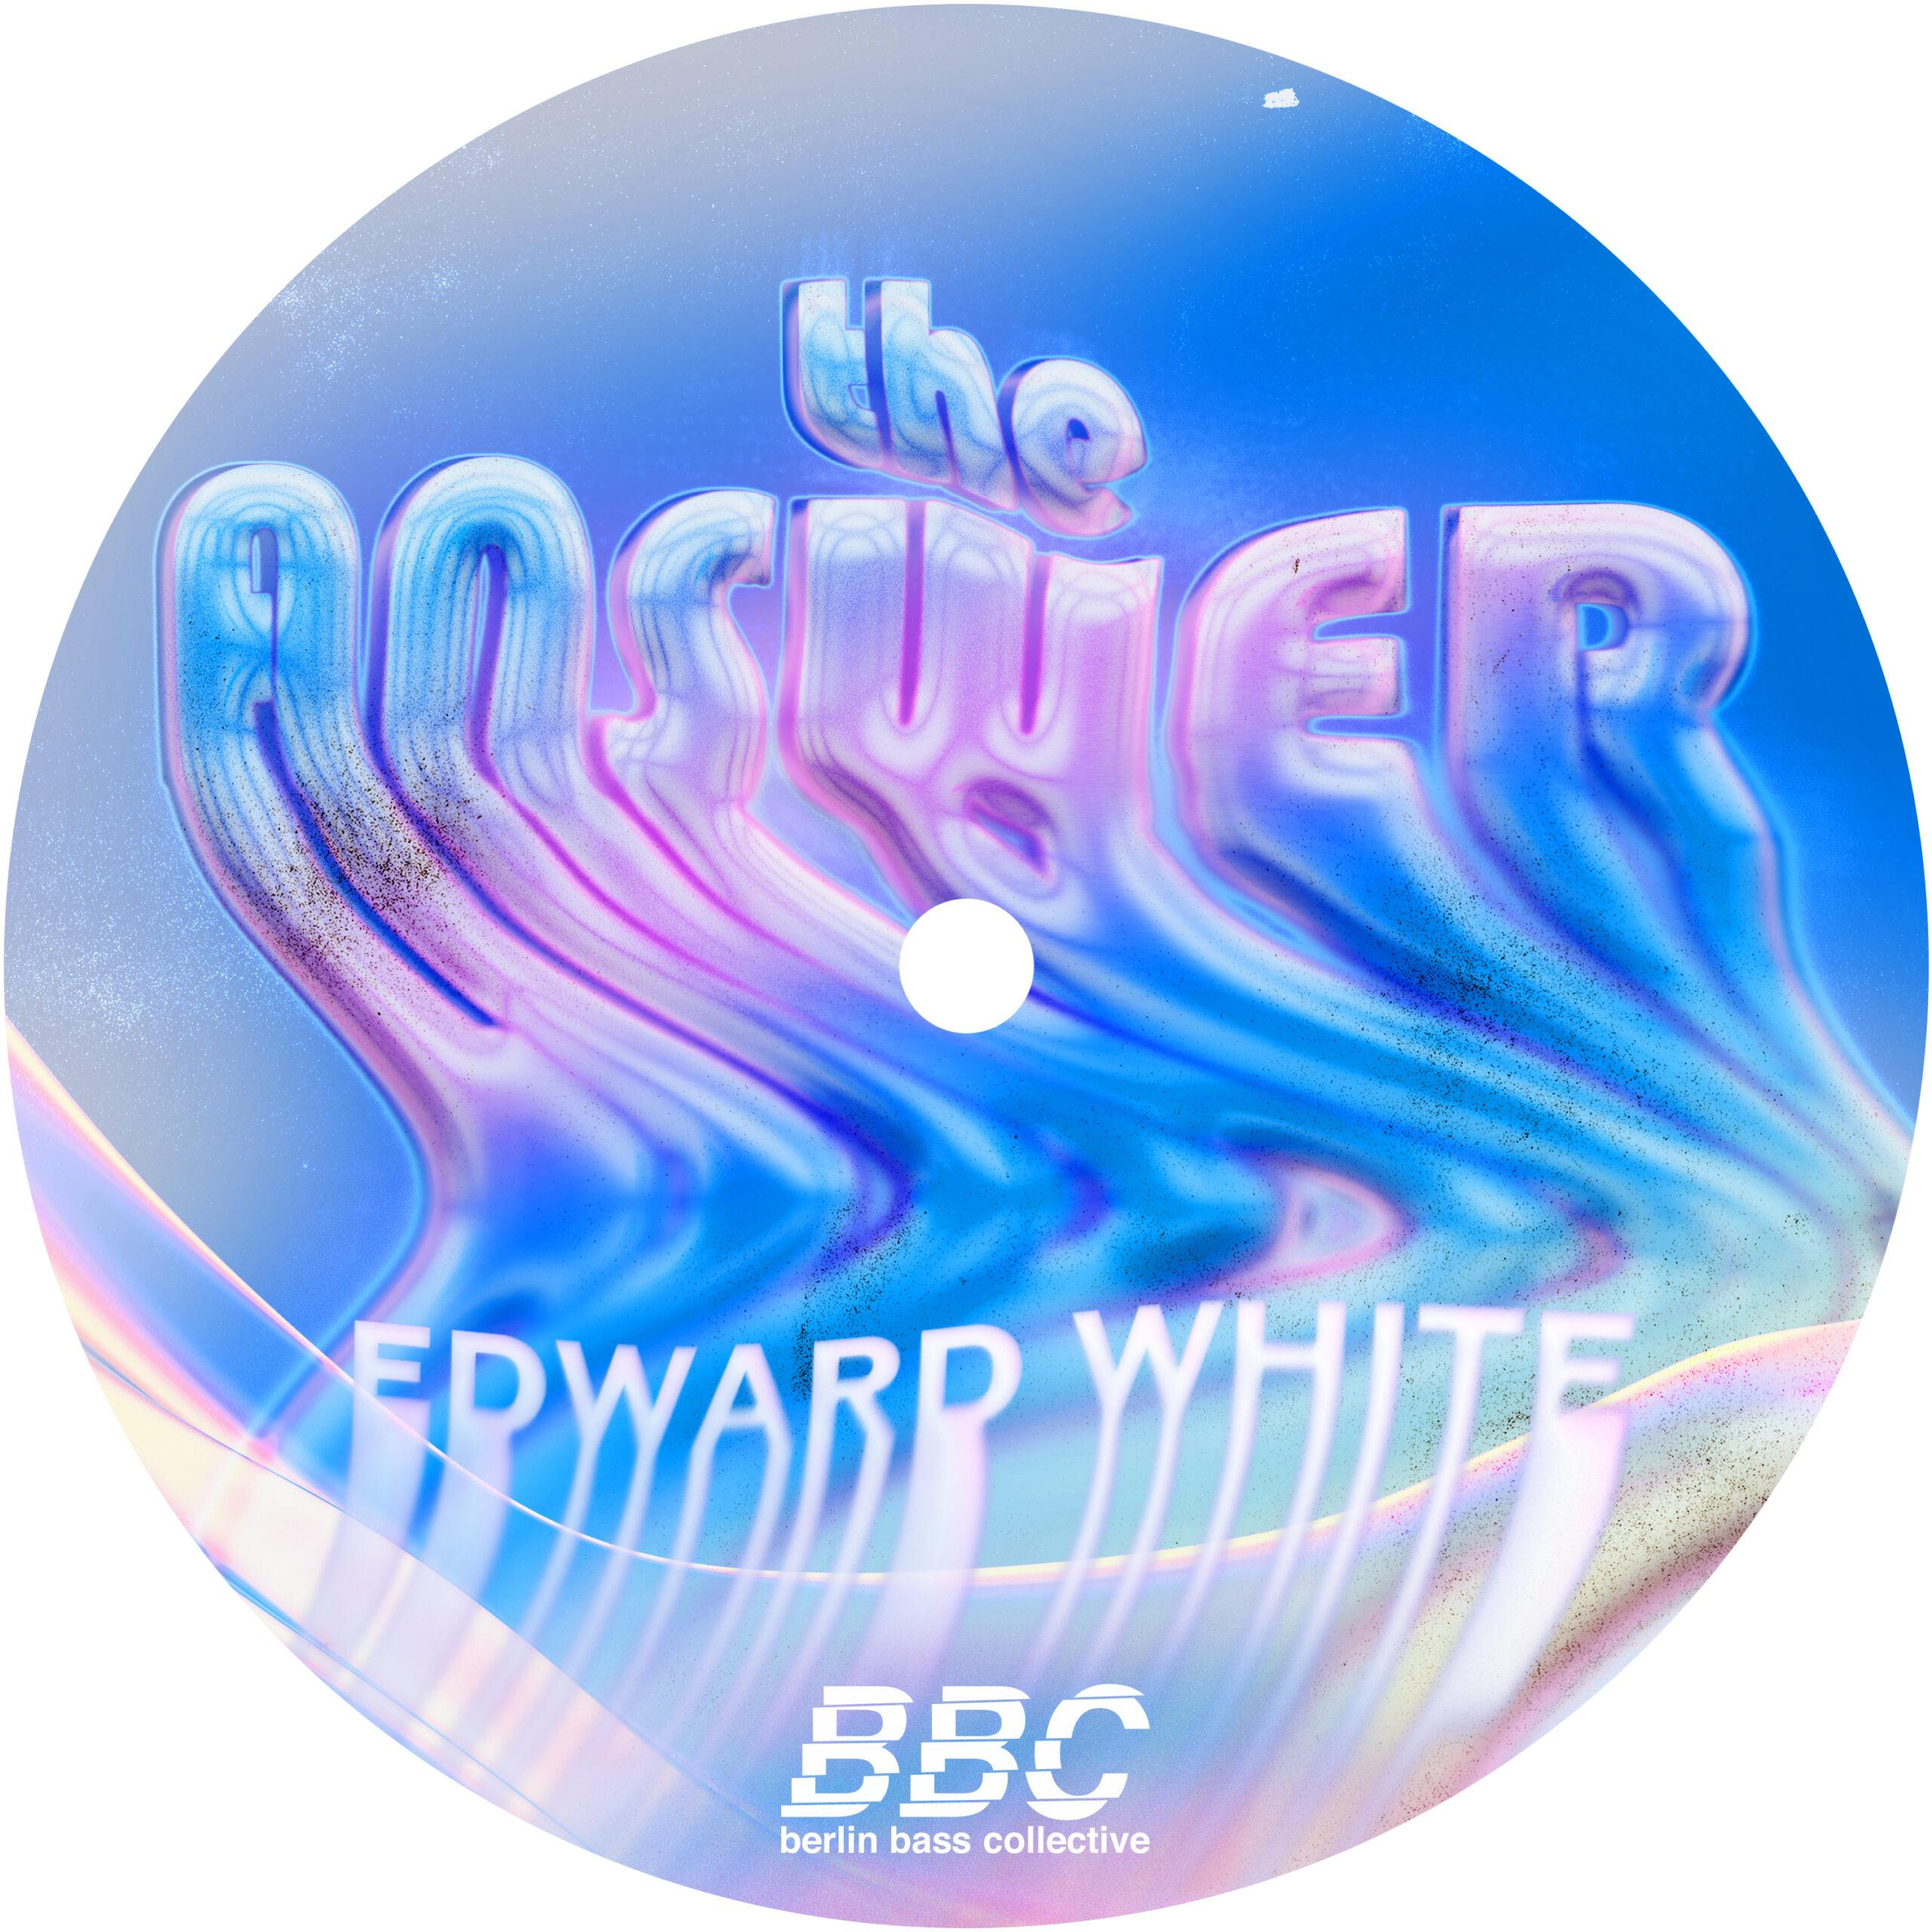 Edward White drops ‘The Answer’ on Berlin Bass Collective